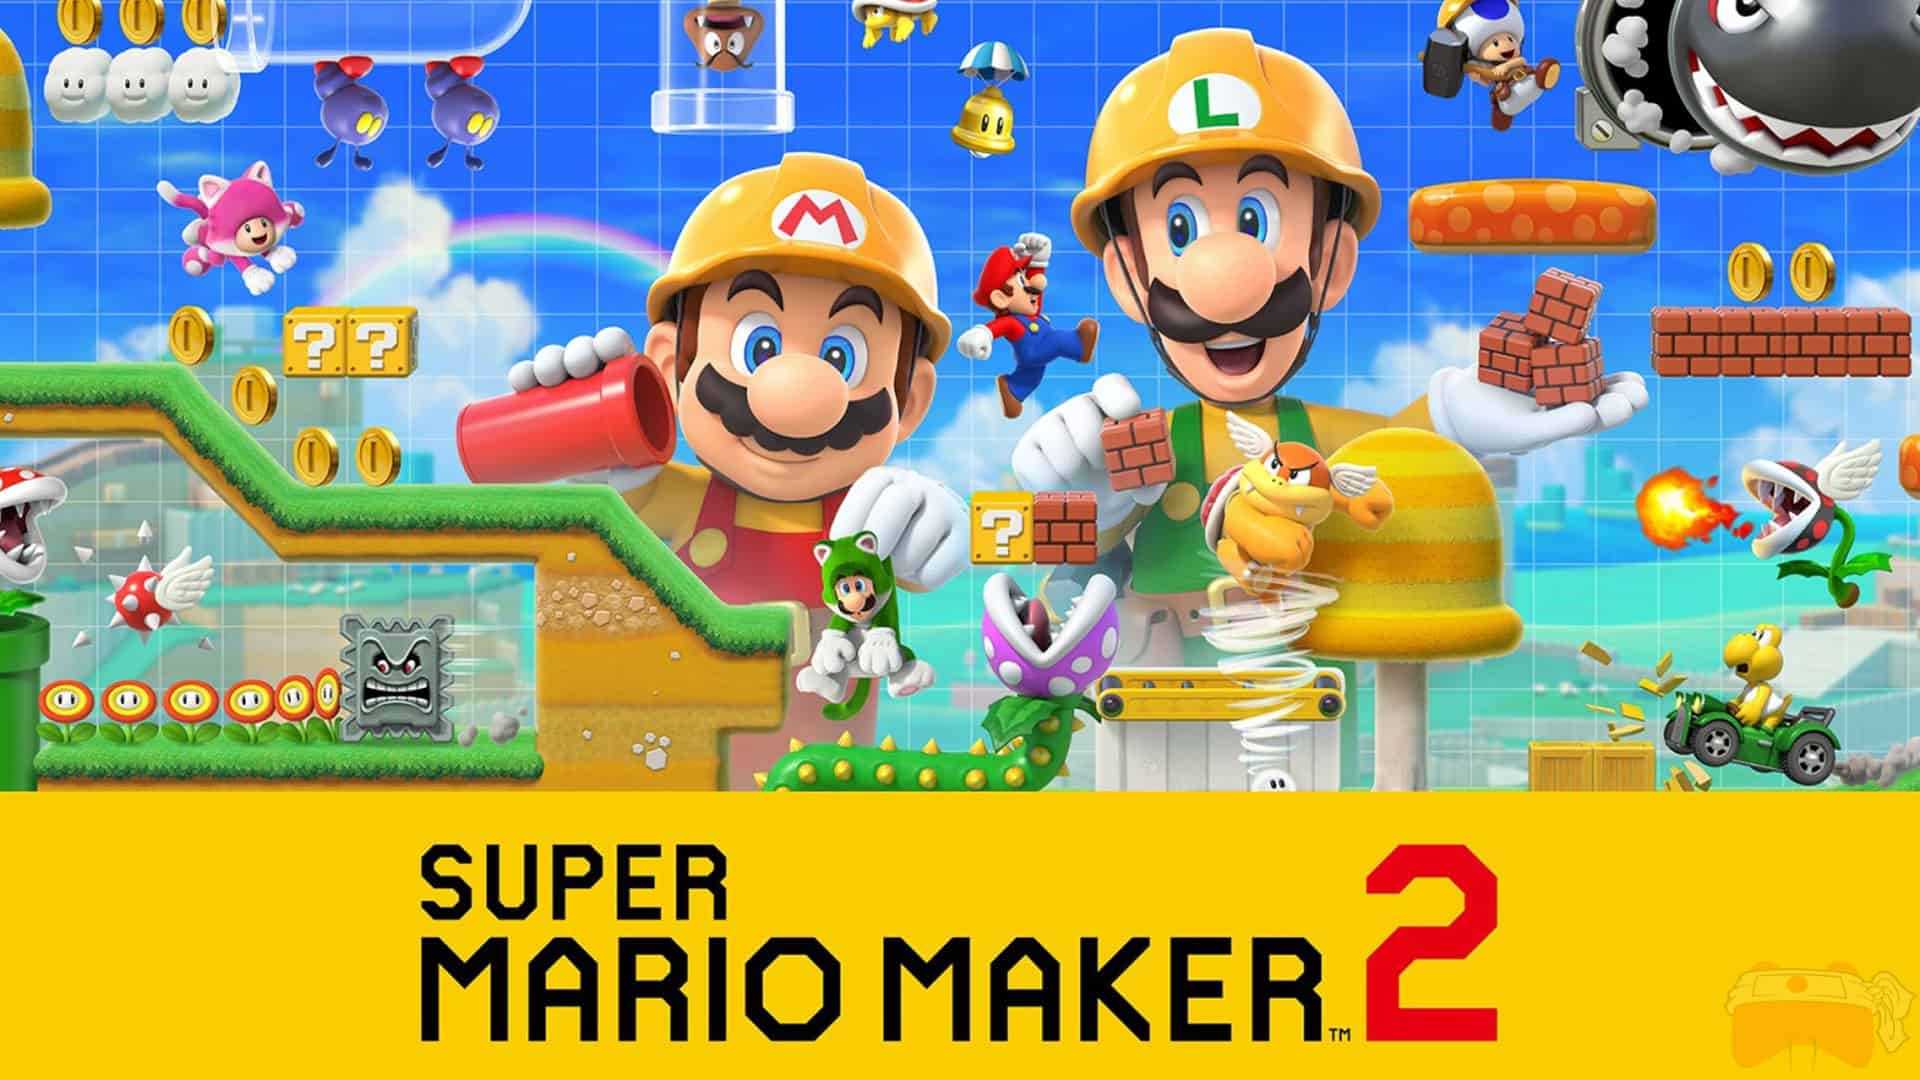 Super Mario Maker 2 Launches For Nintendo Switch On 28th June With Limited Edition Bundle